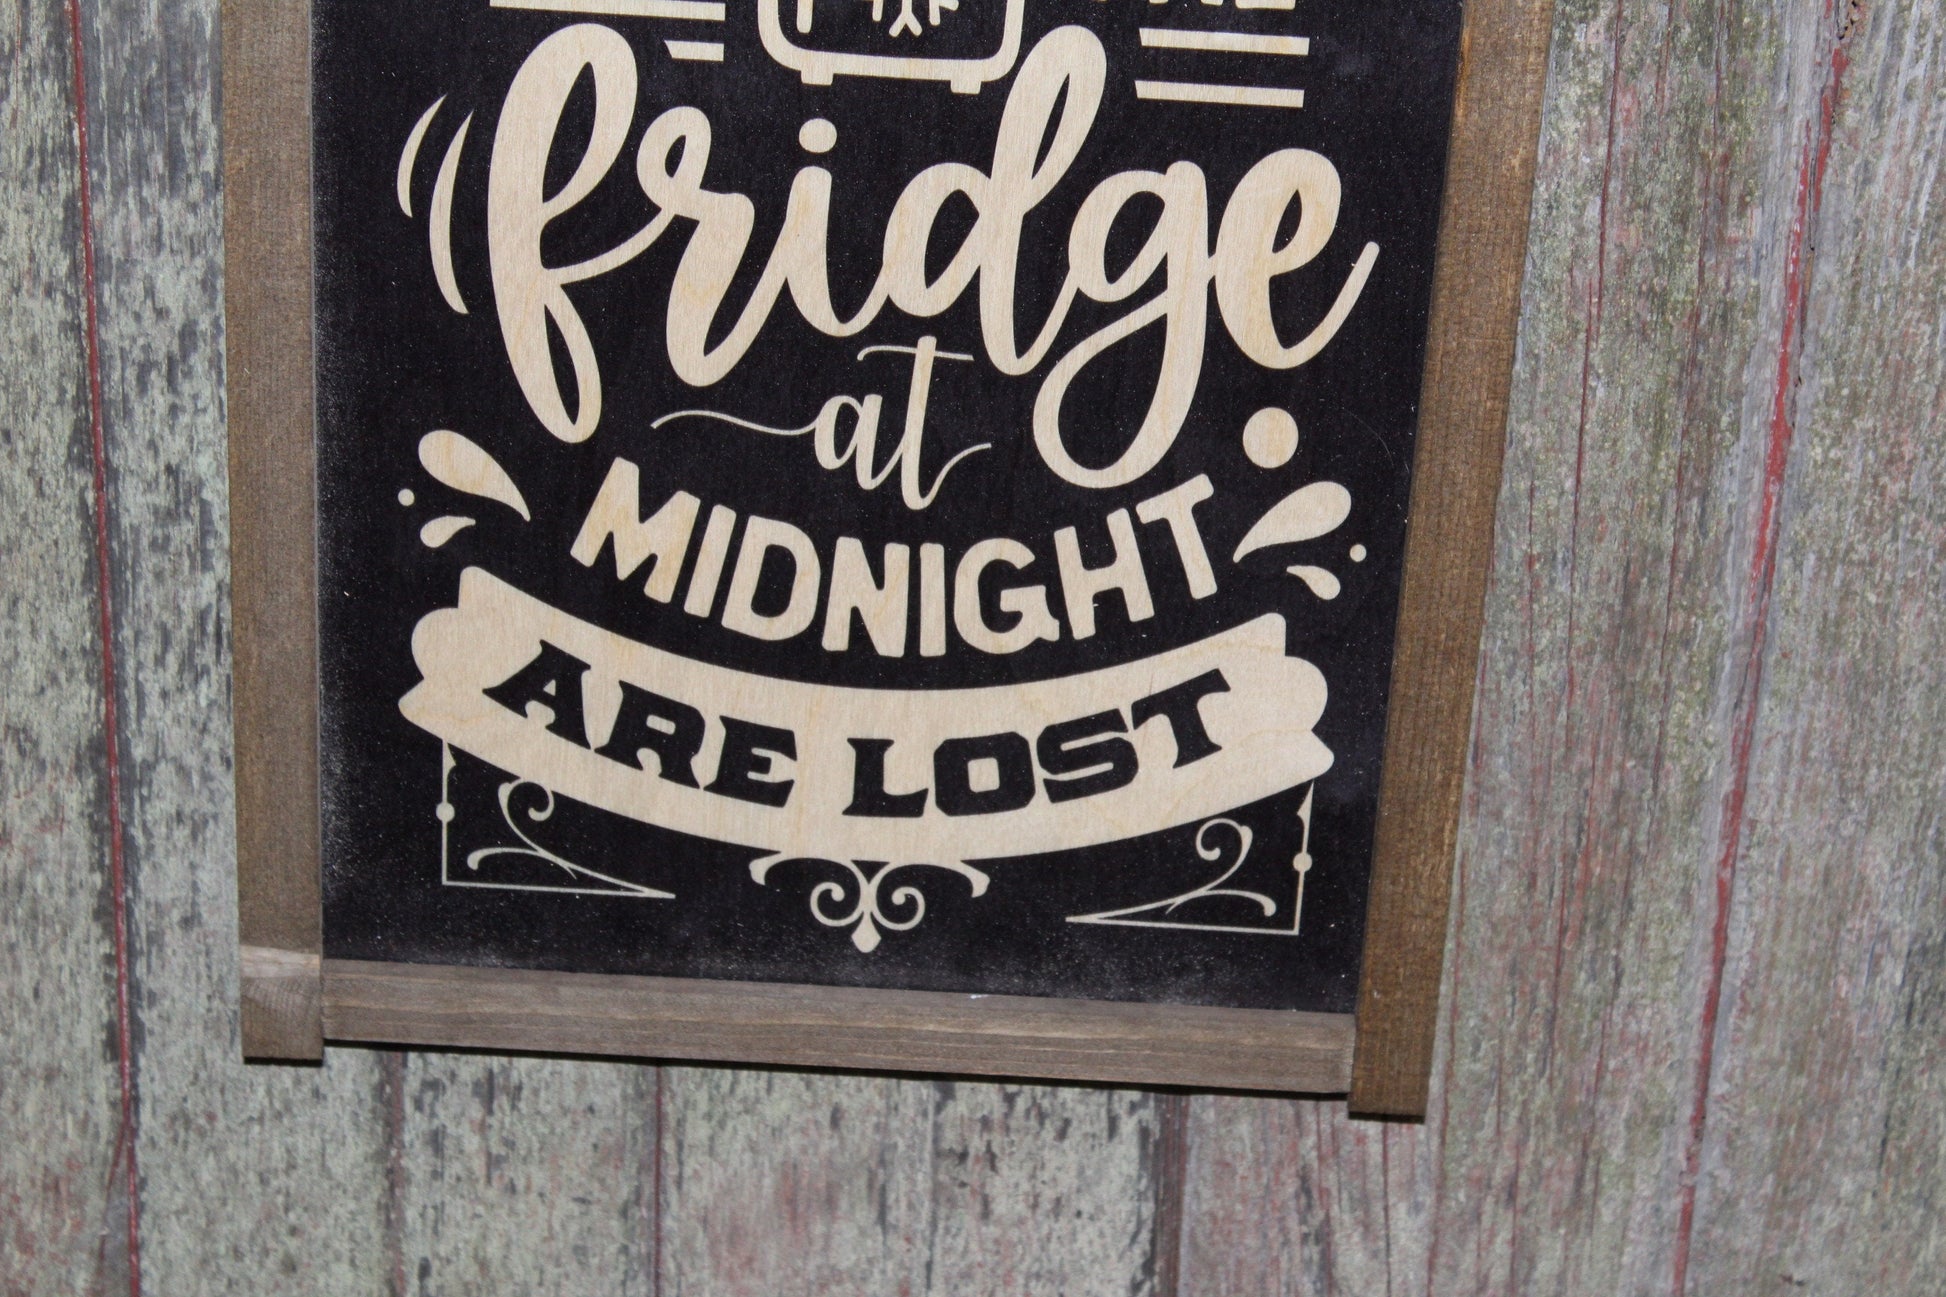 Not All Who Wonder Wood Sign To The Fridge at Midnight Are Lost